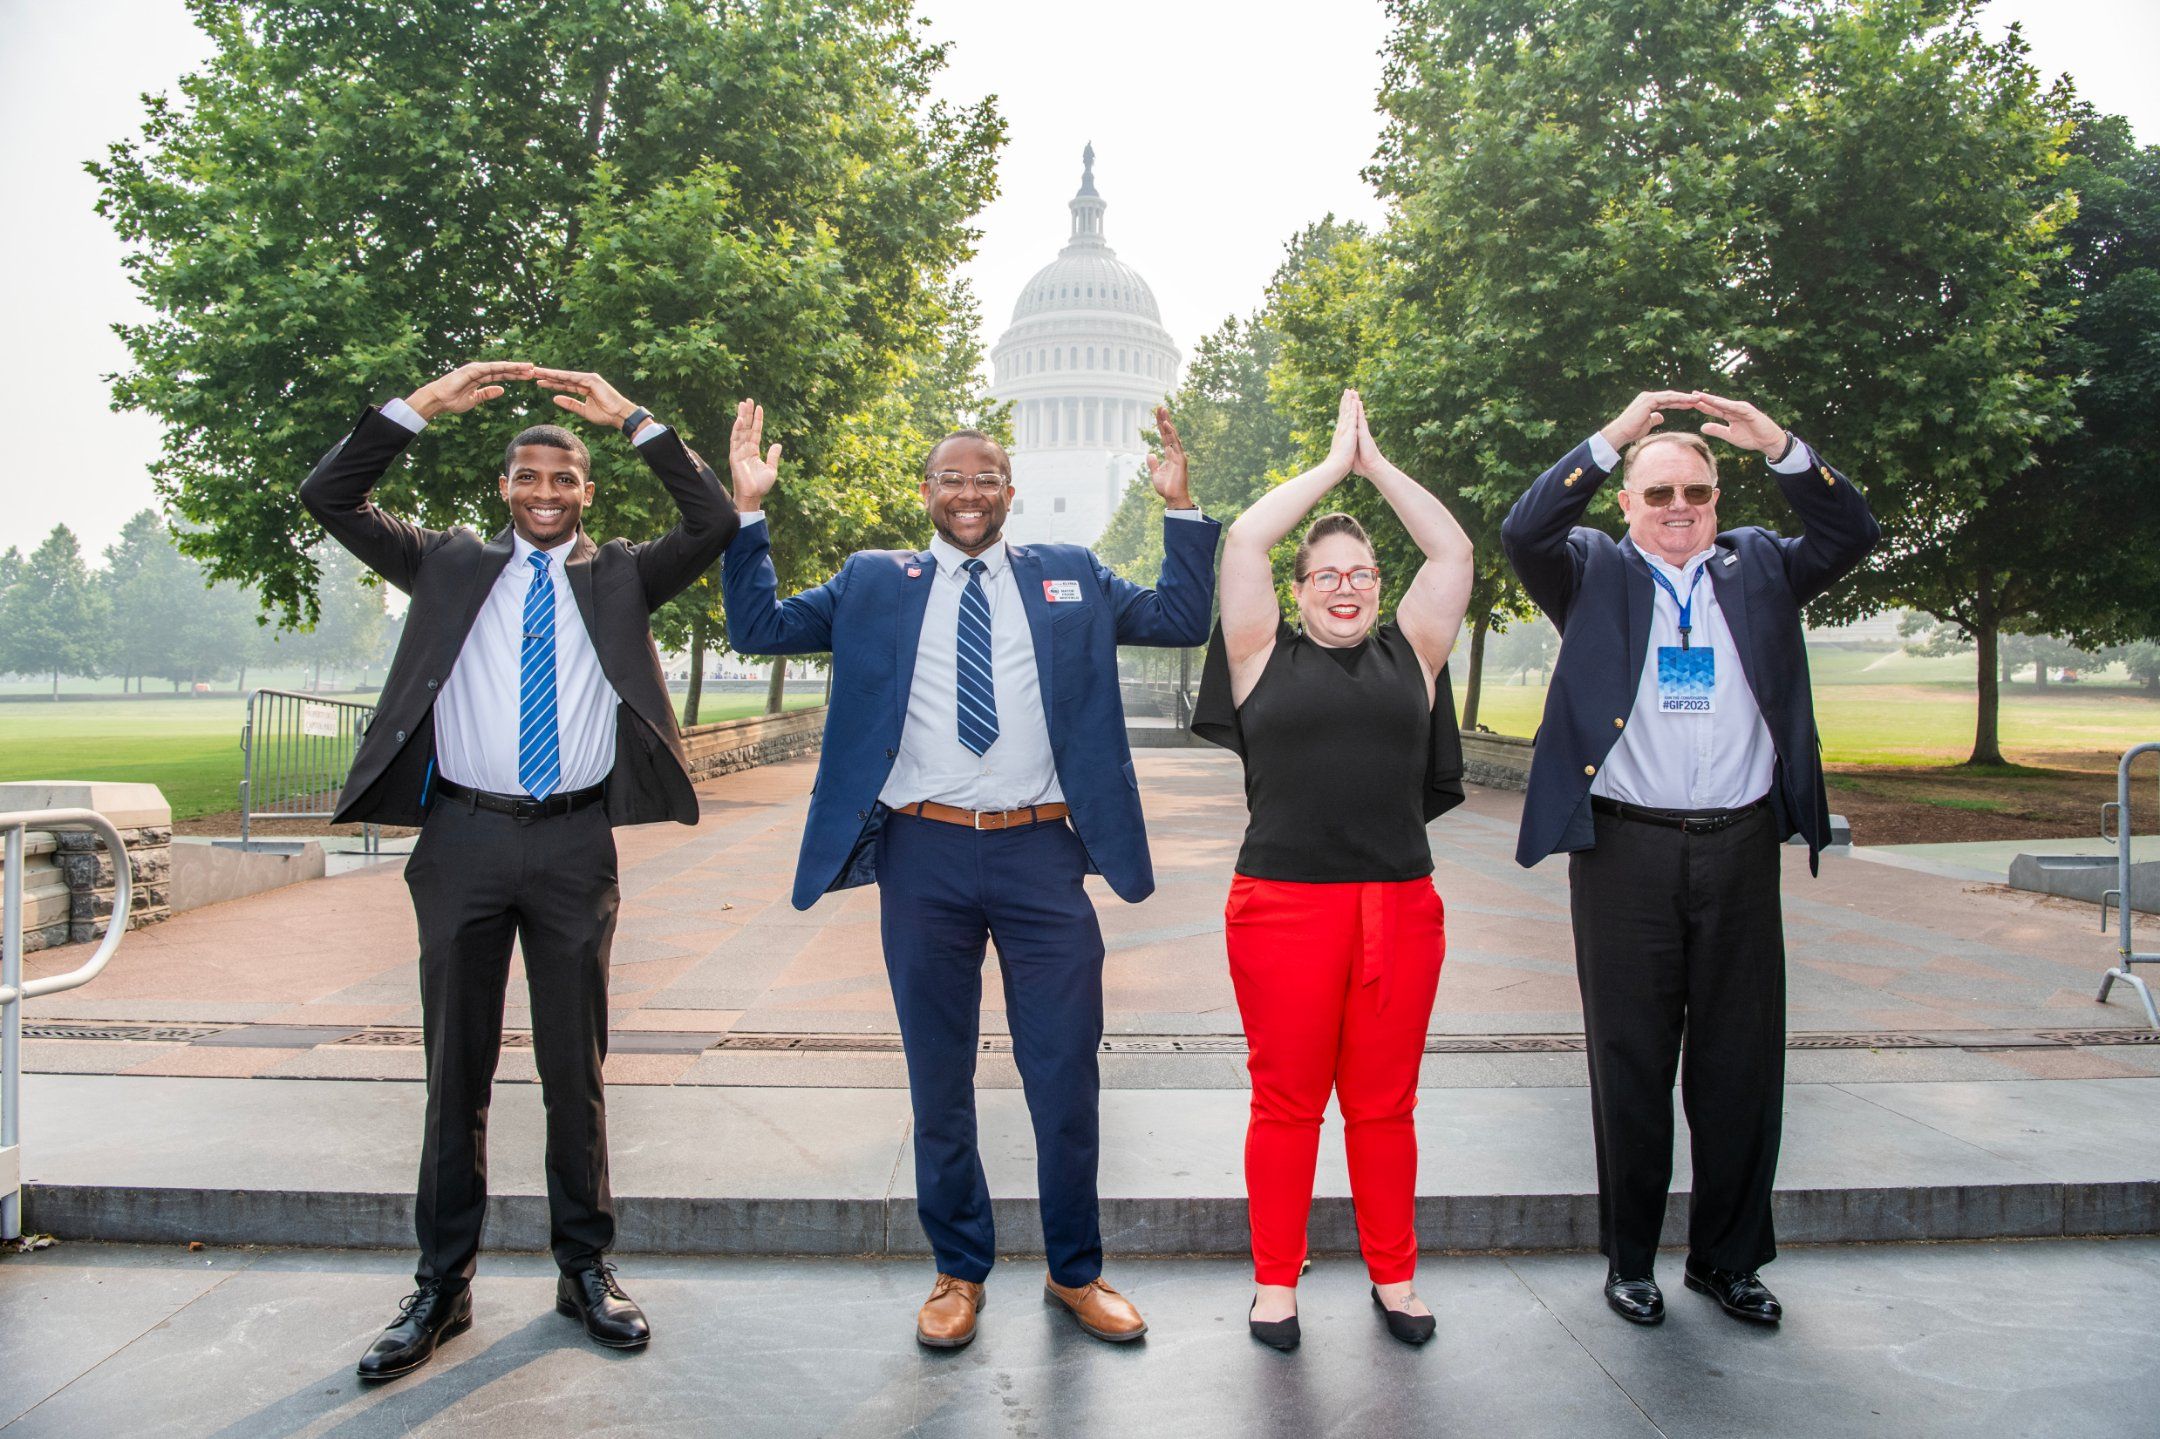 An O-H-I-O in front of the US Capitol.